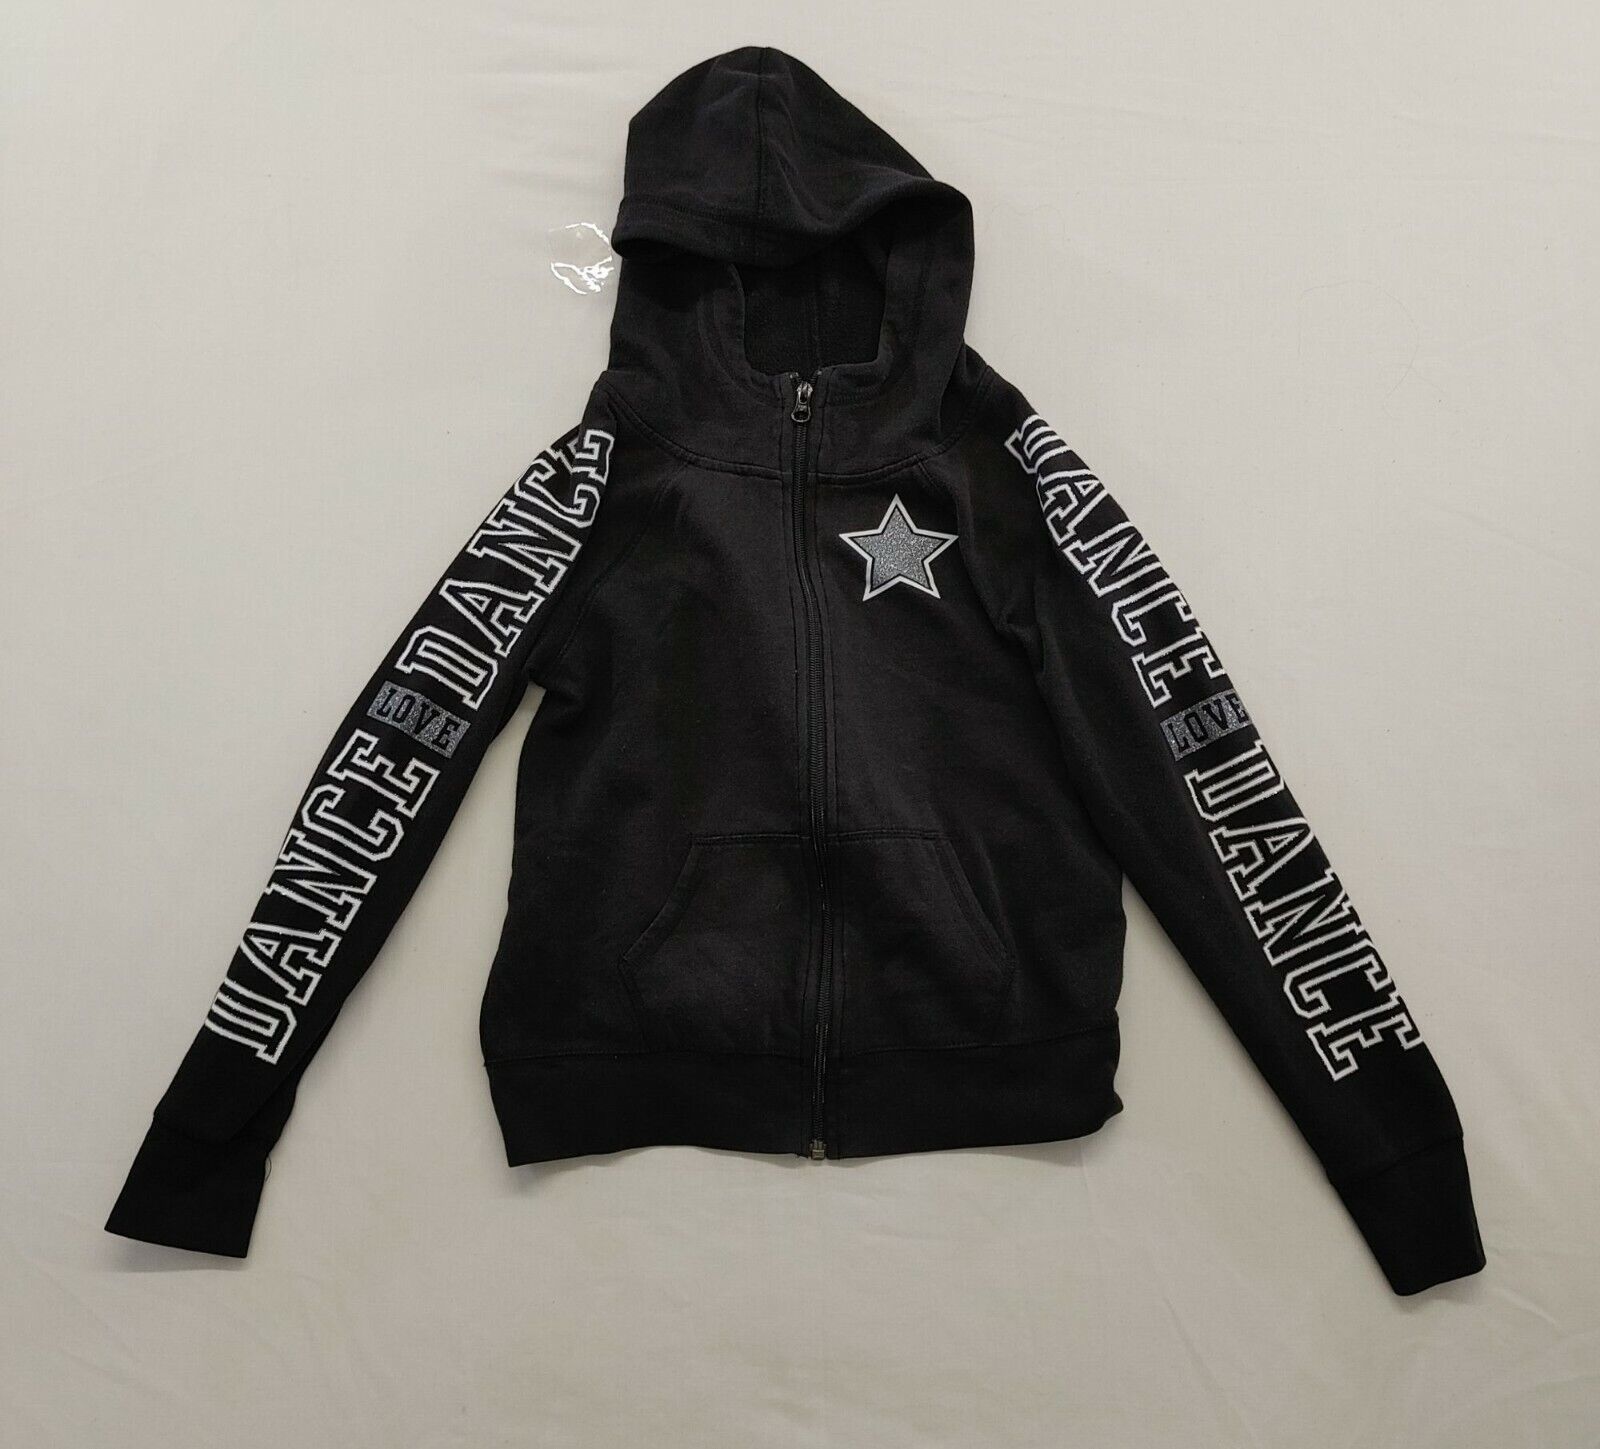 Primary image for Justice Full Zip Hoodie Girls Size 12 Black Sparkle Spell Out Long Sleeve Hooded